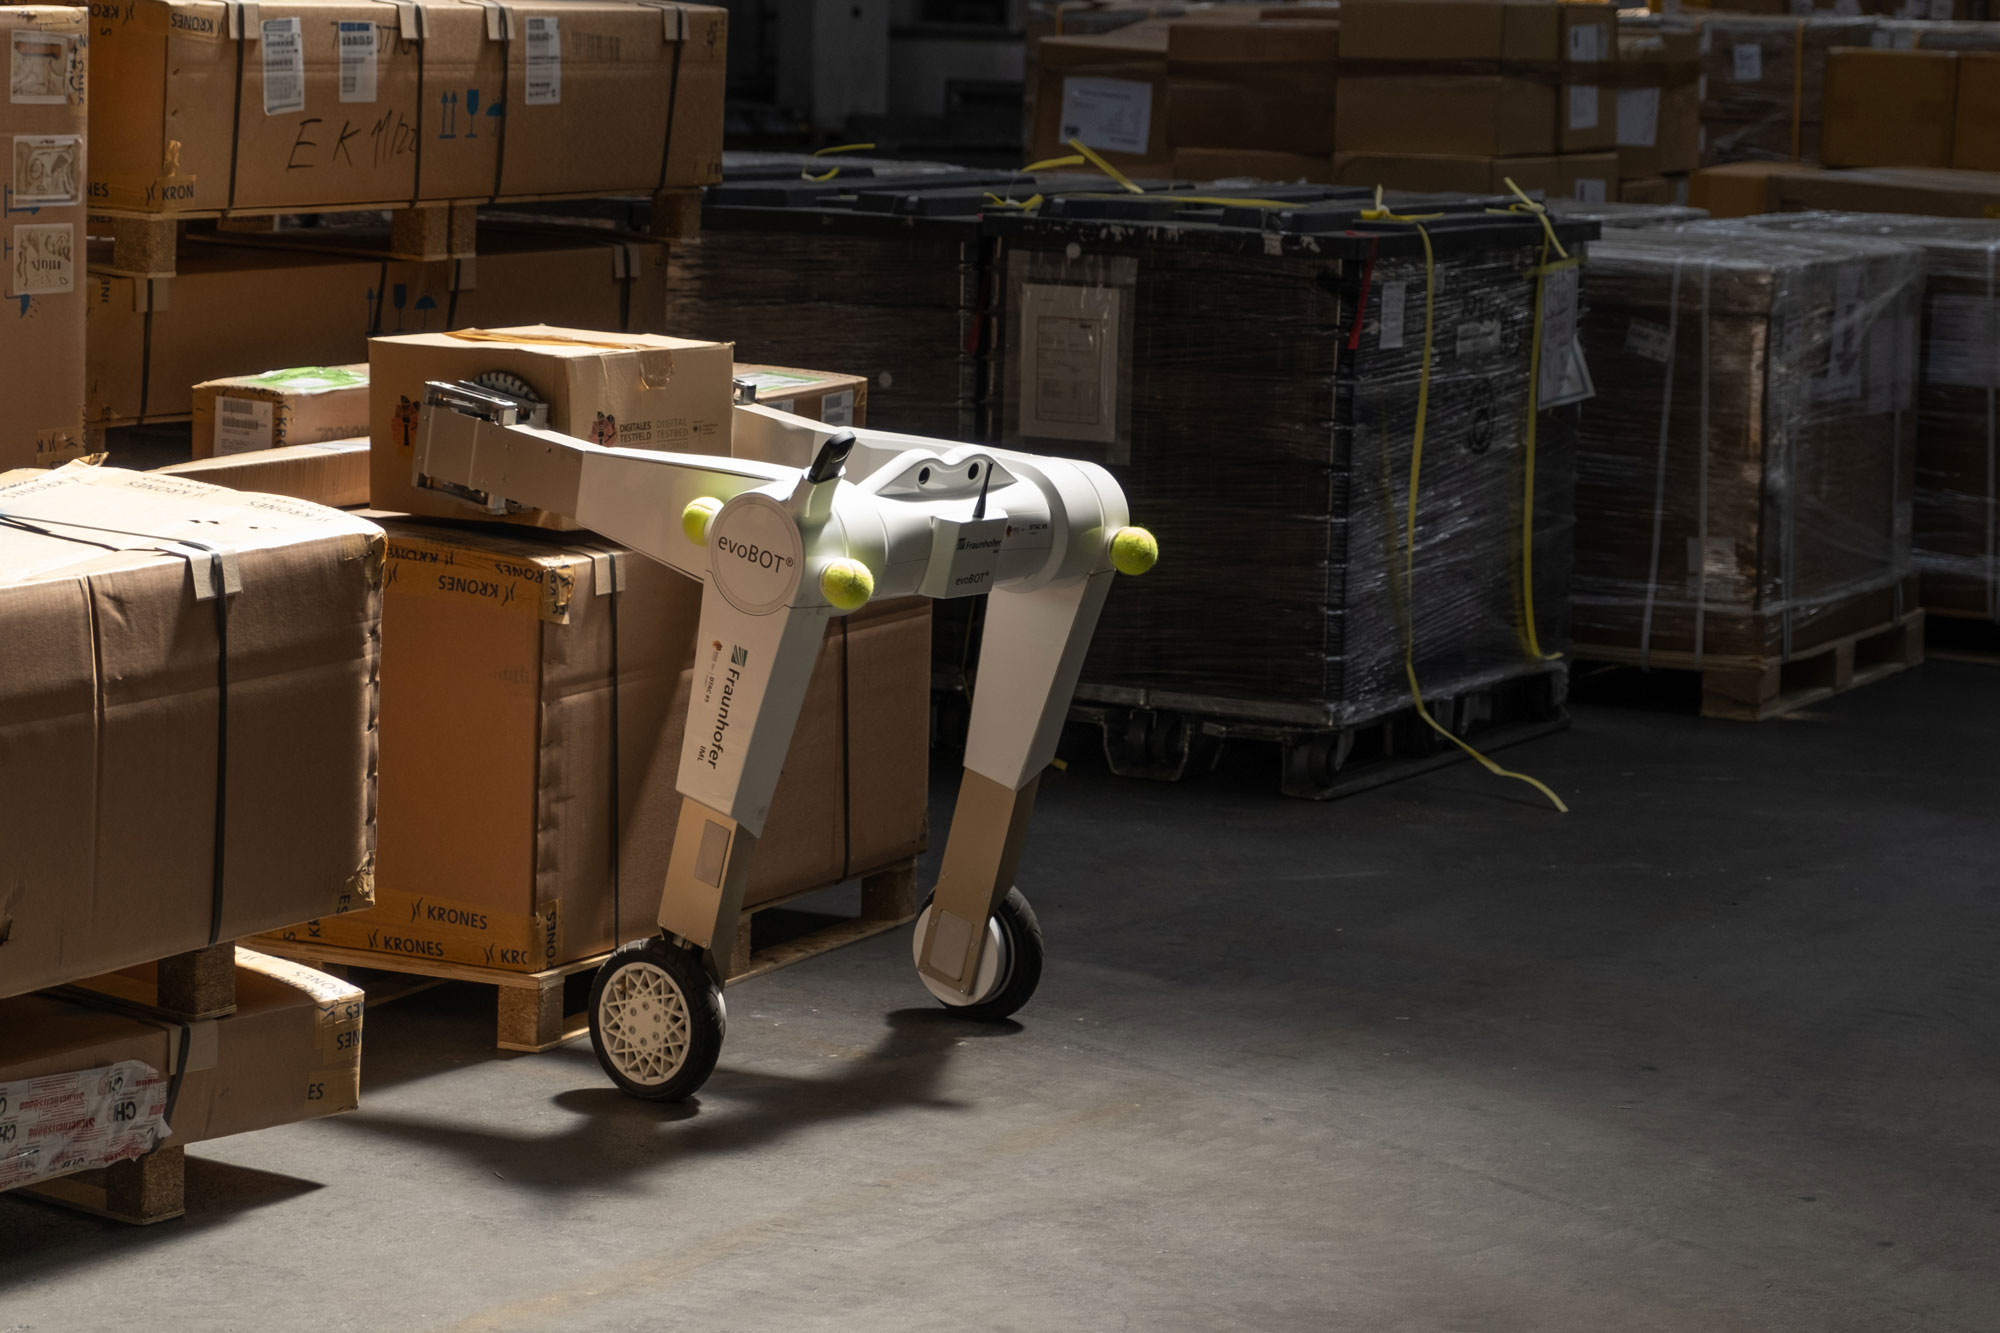 evoBot, designed by Fraunhofer IML, lifts parcel from pallet during air freight handling at Munich Airport during the demonstration of the DTAC research project.